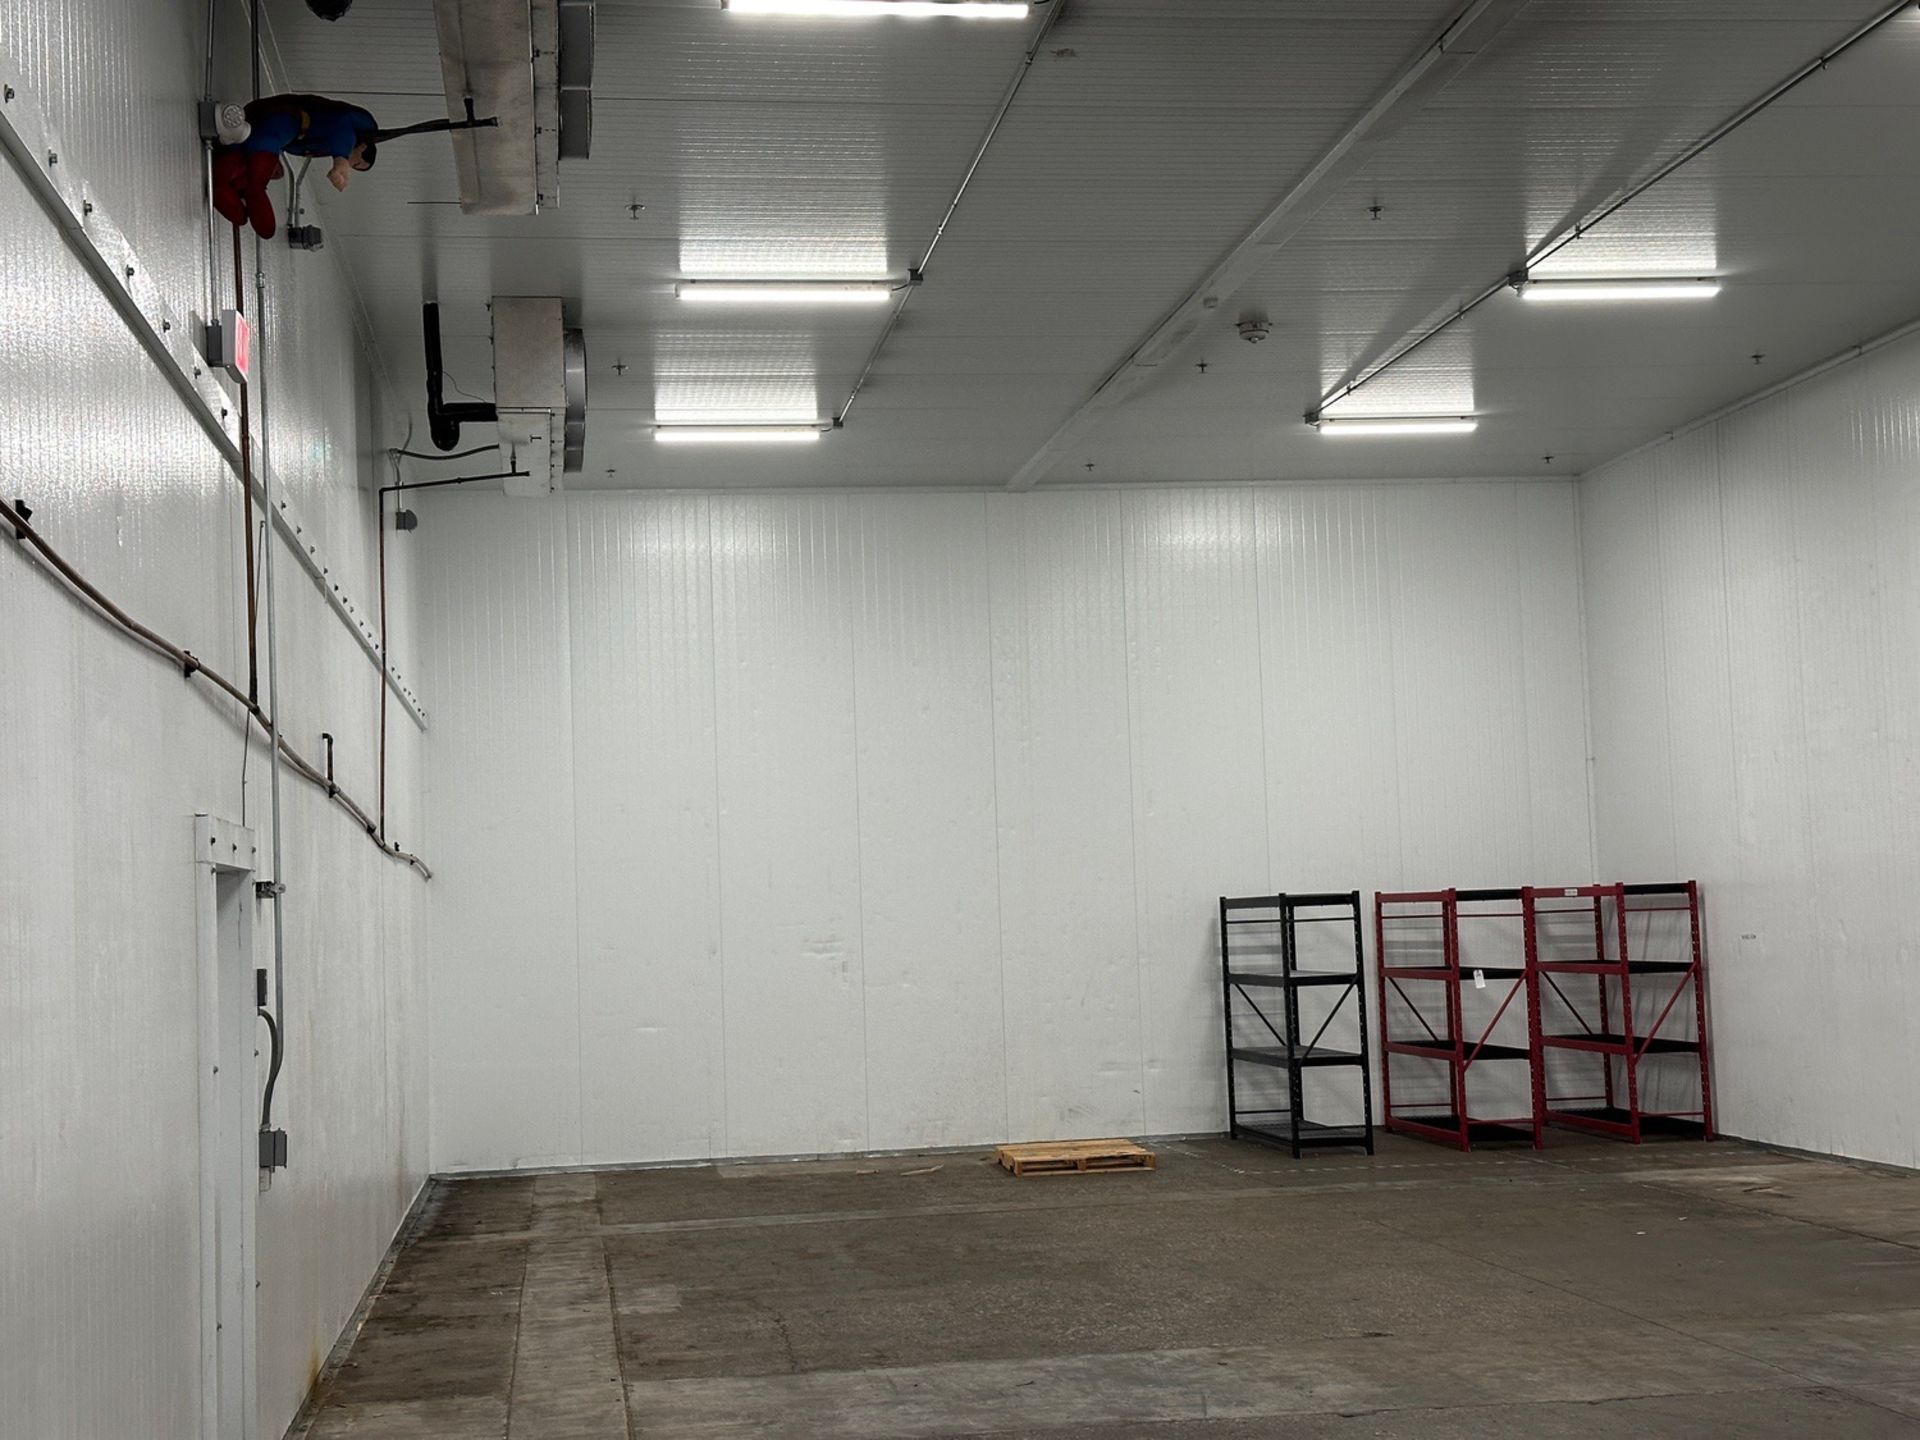 Cold Box - (3) Cooling Units - Shared Wall - (Approx. 32' x 77' x 18' - 8' x 10' Drive In Door - Man - Image 4 of 14